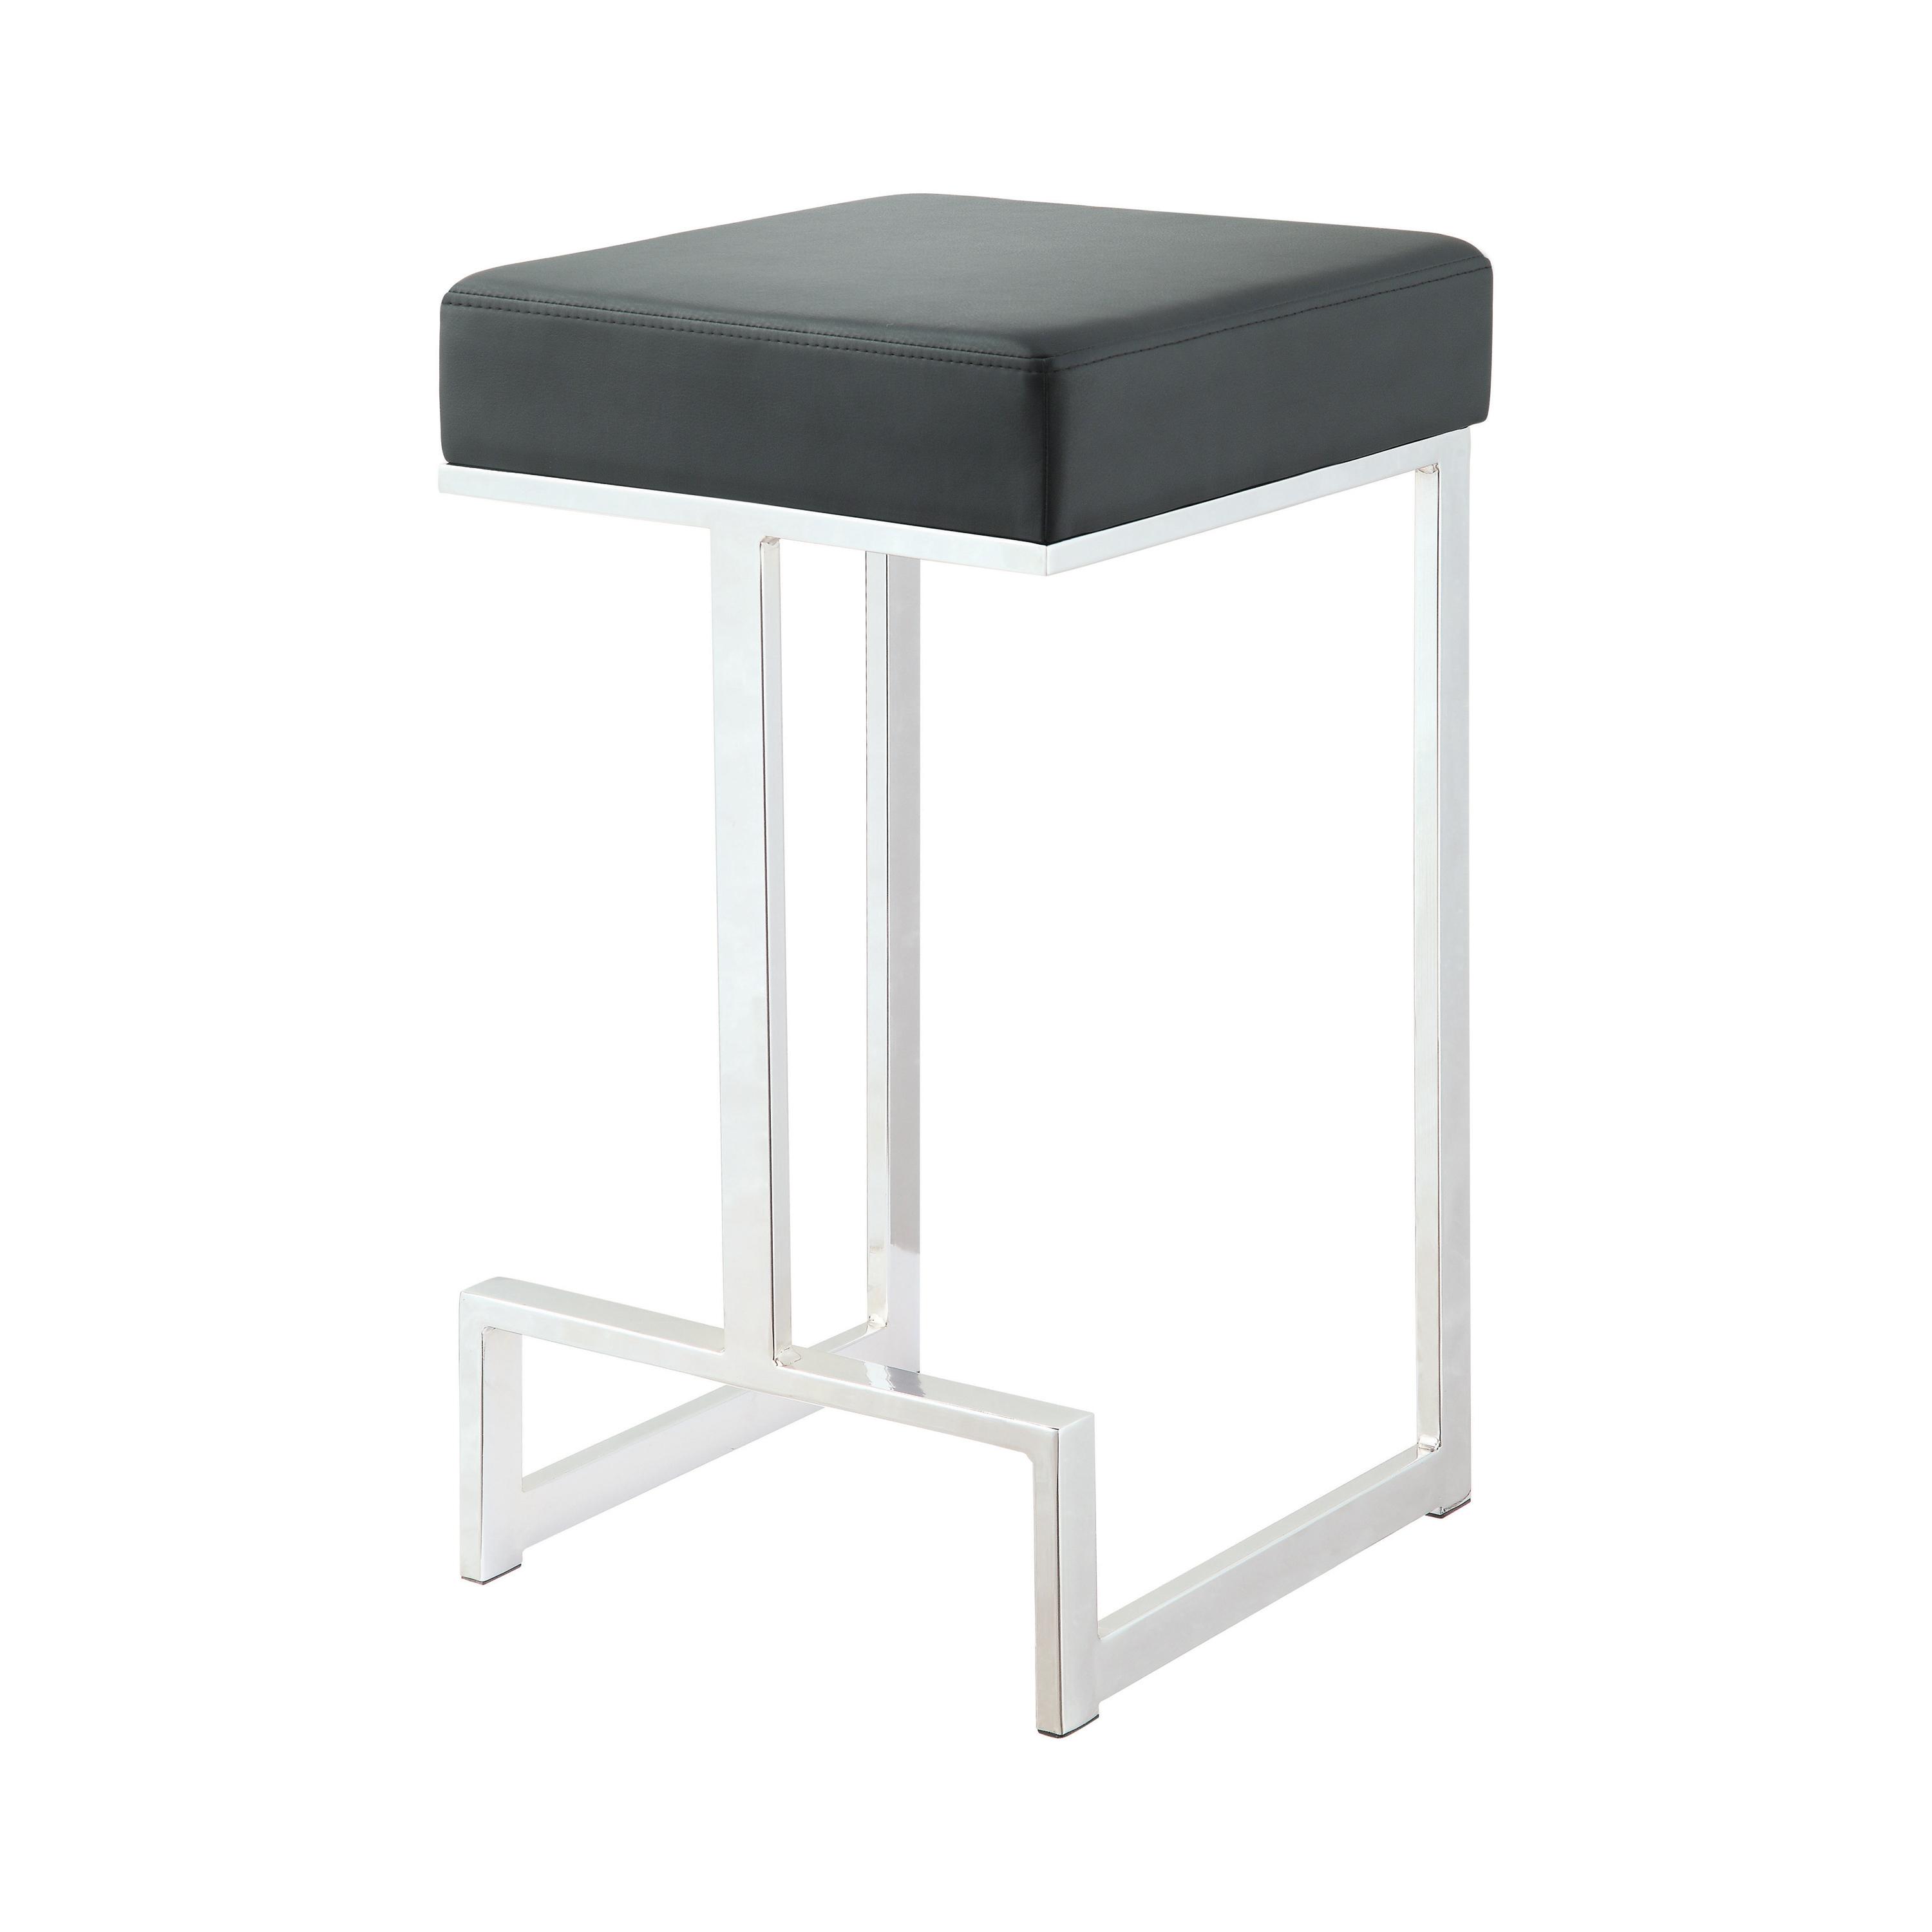 Modern Counter Height Stool 105253 105253 in Black Leatherette